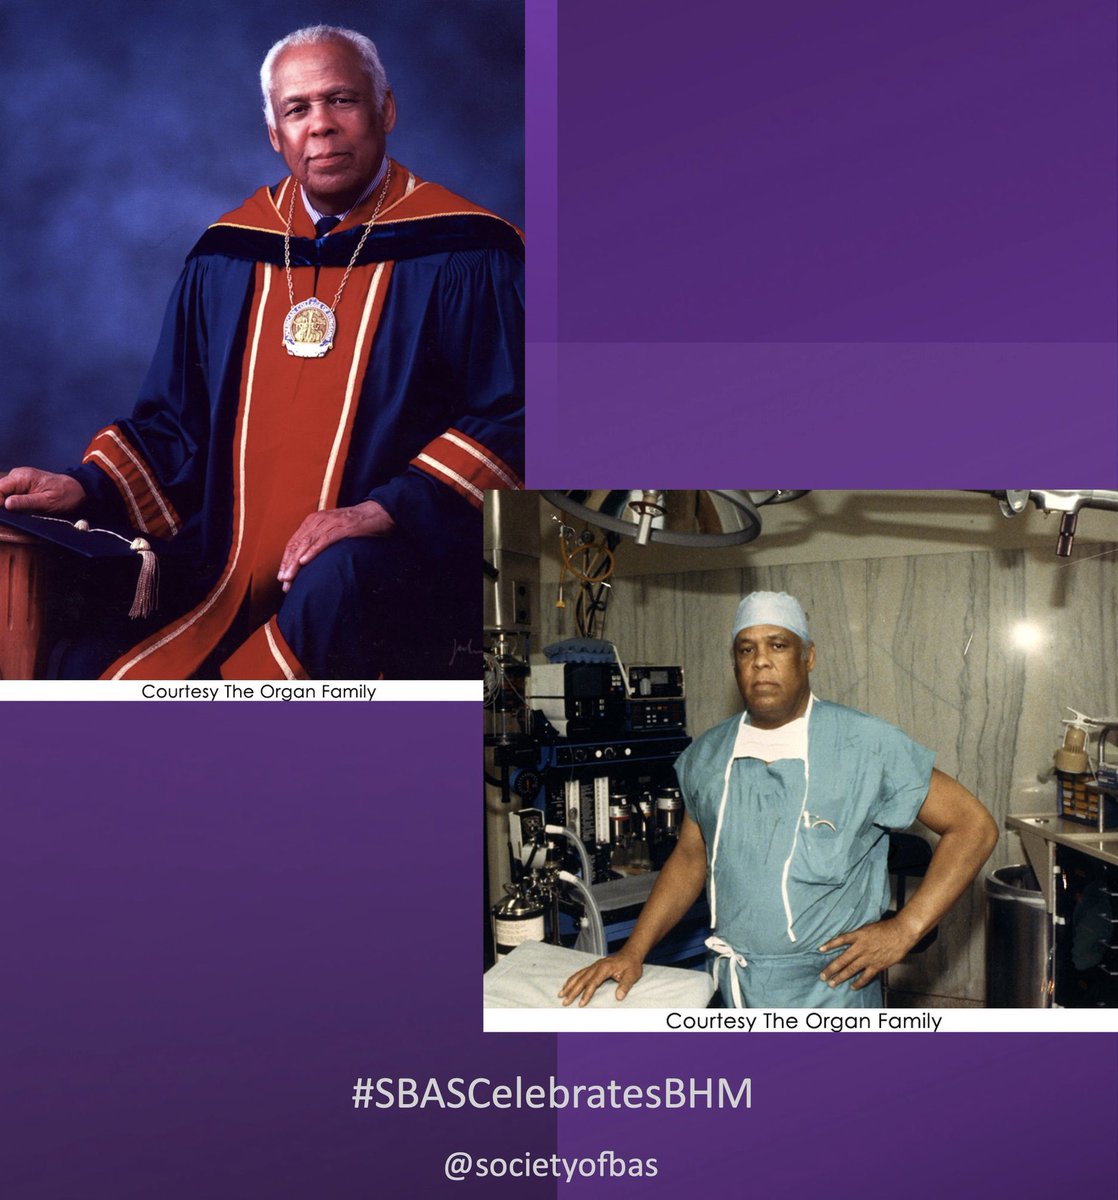 (🧵2/2) Dr. Organ was an EDUCATOR and LEADER in the field of surgery. He served as the 2nd African American President of the @AmCollSurgeons in 2003 & trained countless residents, dubbing his tenure as 'the year of the resident'. His legacy lives on! #SBASCelebratesBHM #BHM  👇🏾🤩